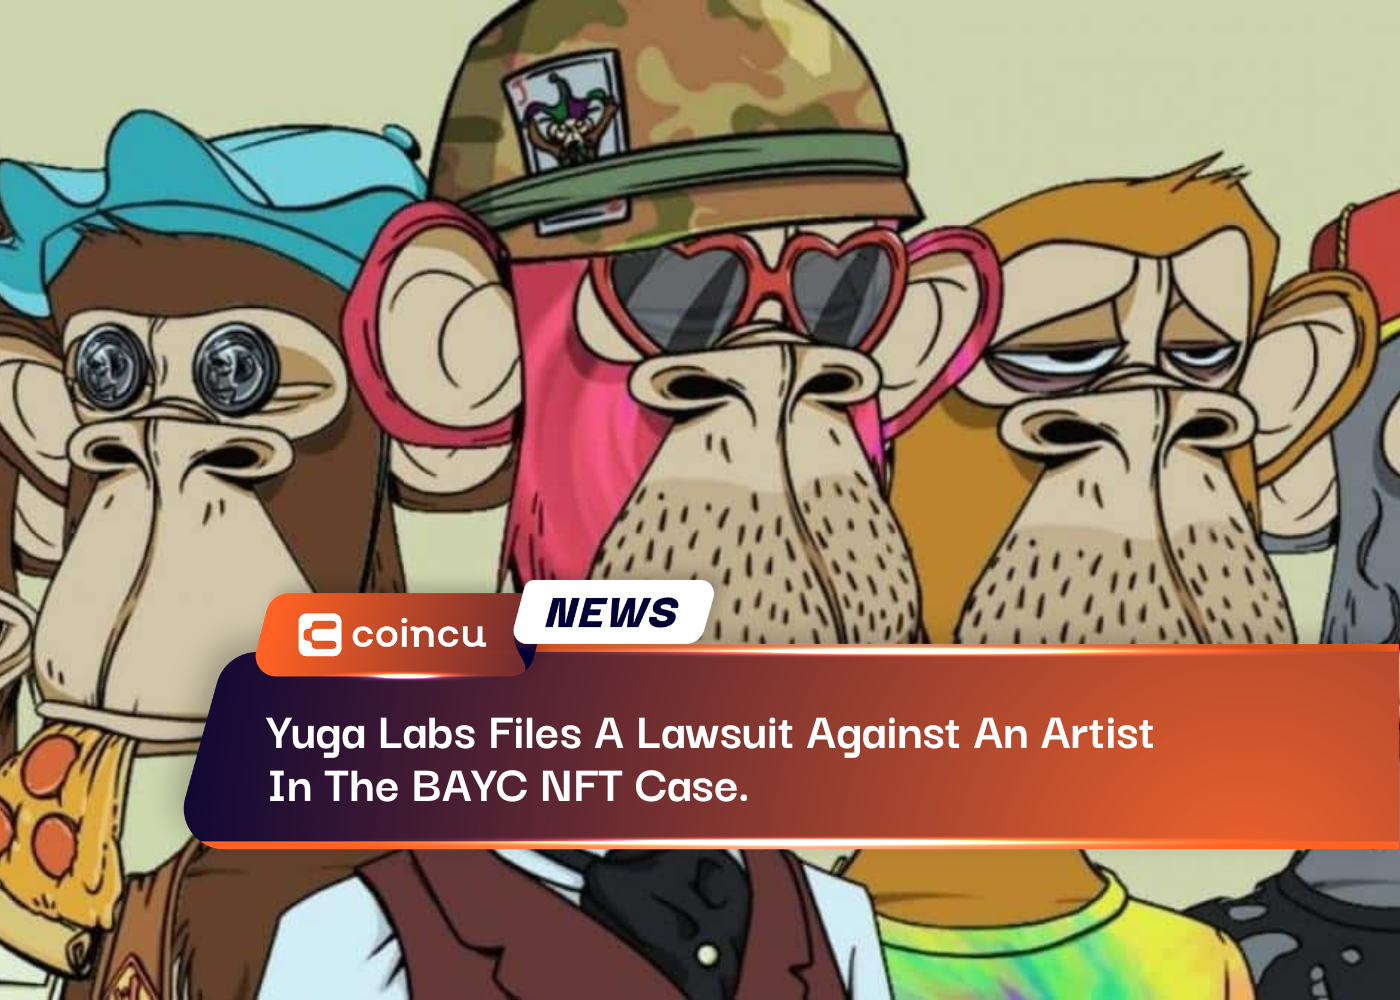 Yuga Labs Files A Lawsuit Against An Artist In The BAYC NFT Case.